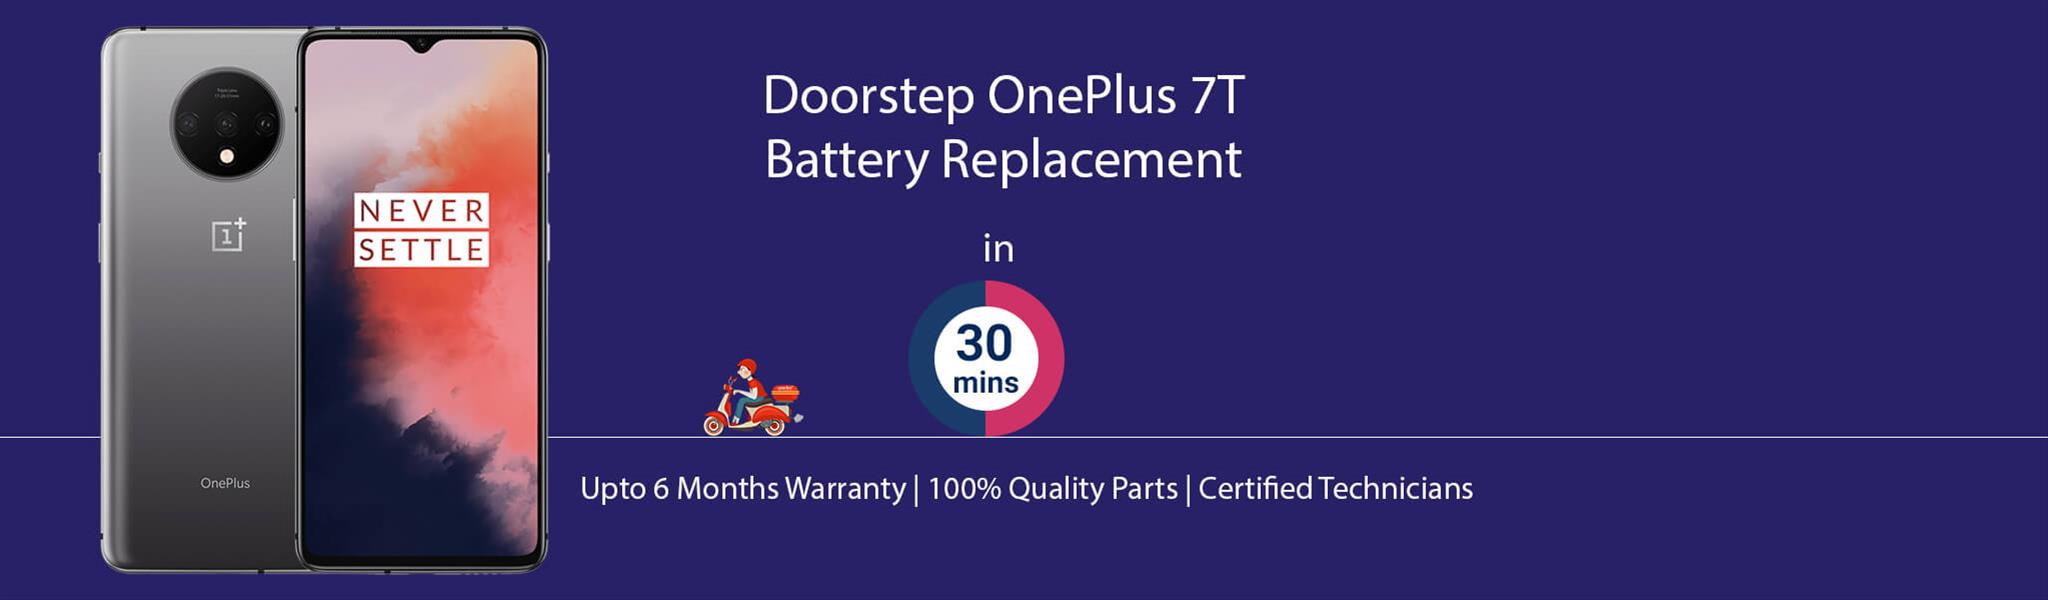 oneplus-7t-battery-replacement.jpg